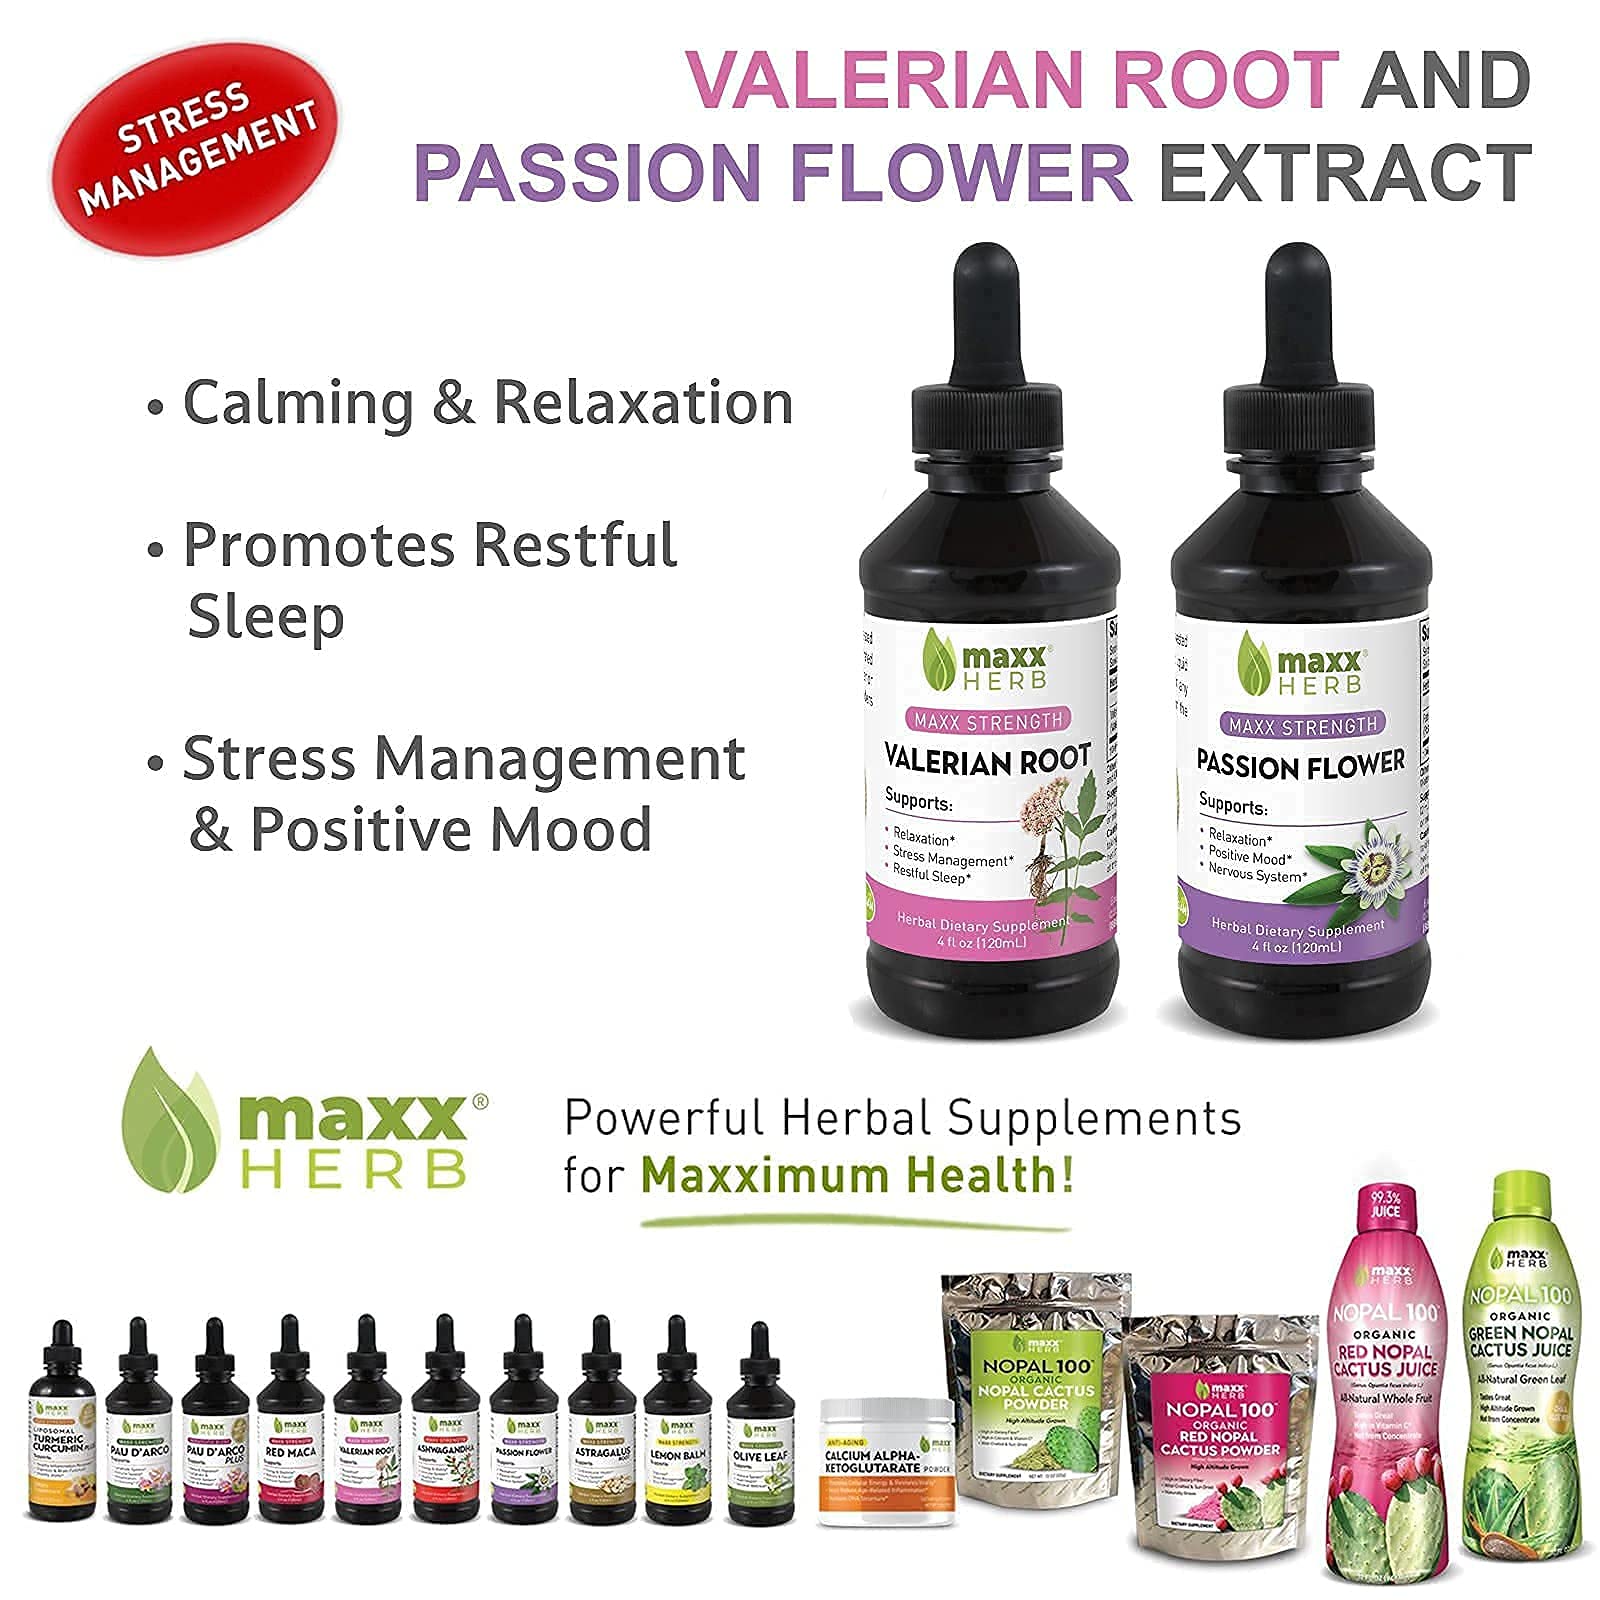 Maxx Herb Passion Flower Extract + Valerian Root Extract - for Relaxation and Stress Management, Alcohol-Free - (1 Each) 4 Oz Bottle (60 Servings)